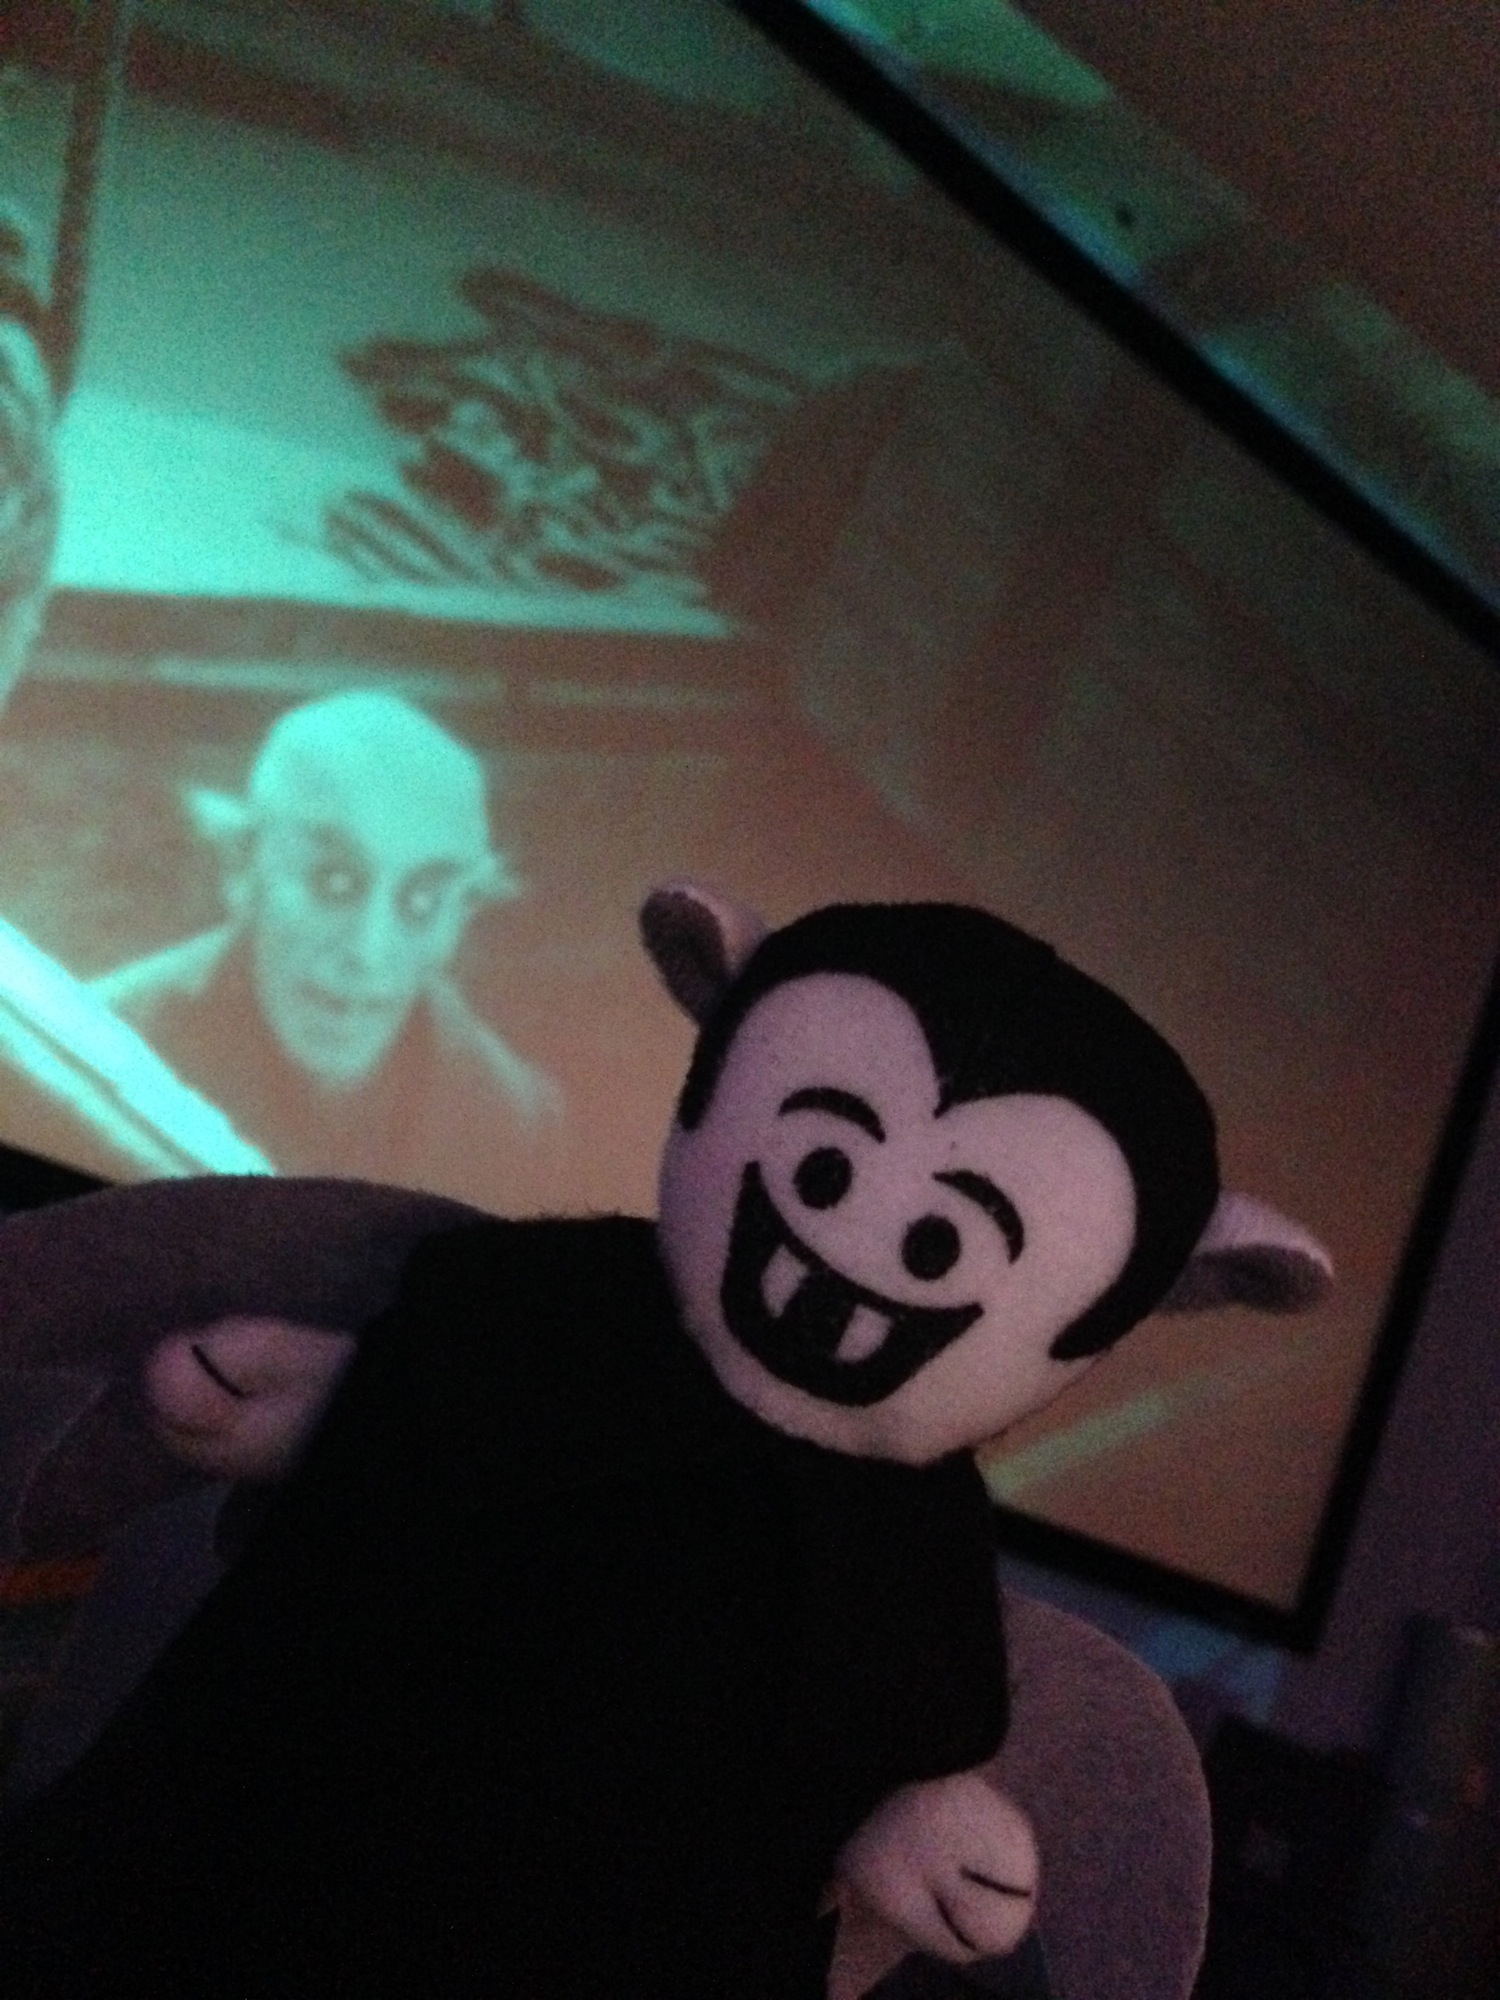 Photo of a Little Vampire plush toy posing in front of a screen showing Nosferatu